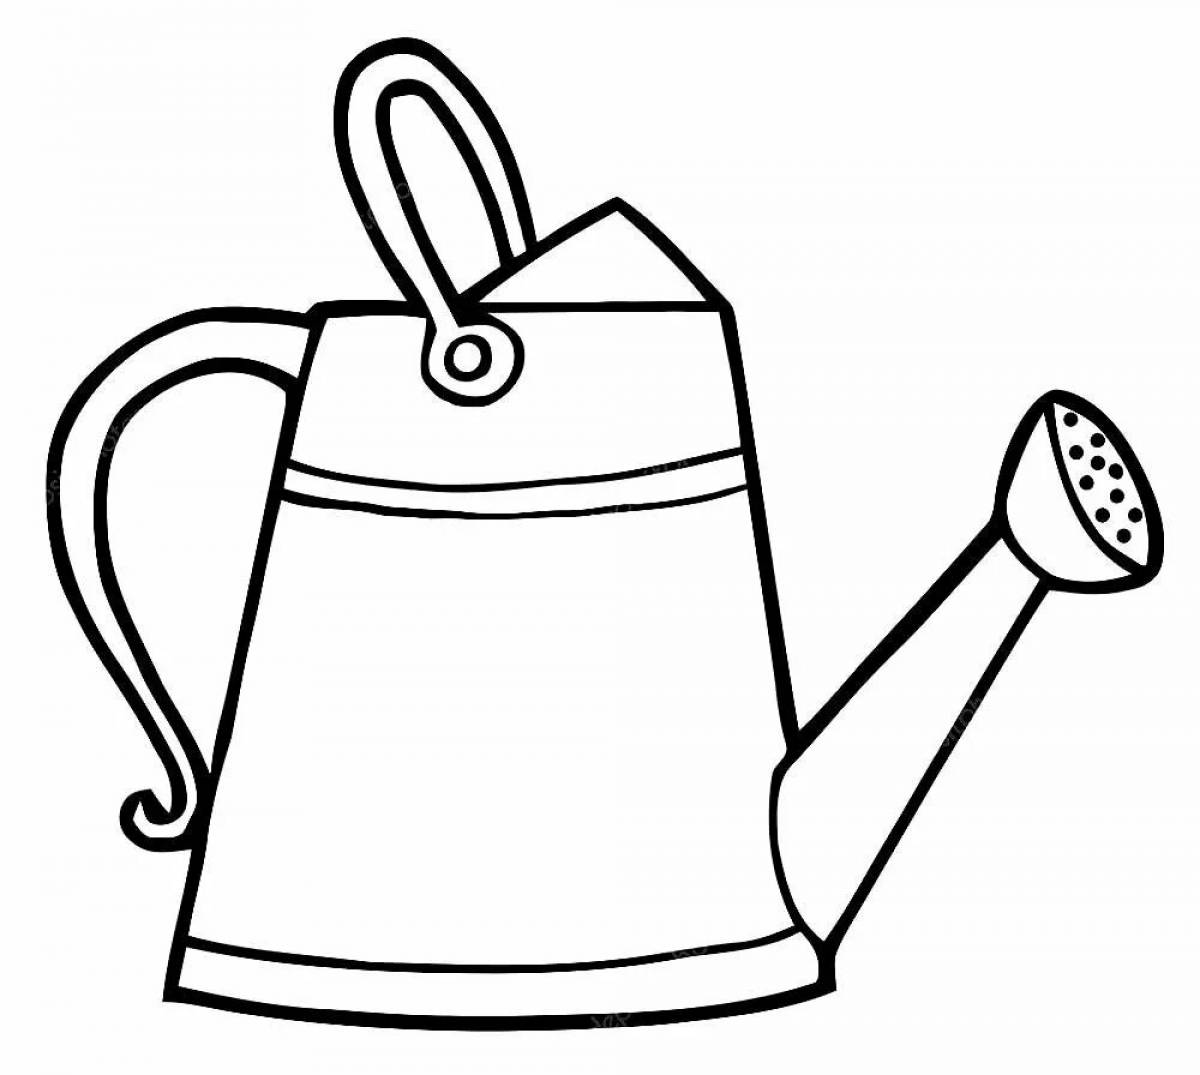 Colorful watering can coloring for kids